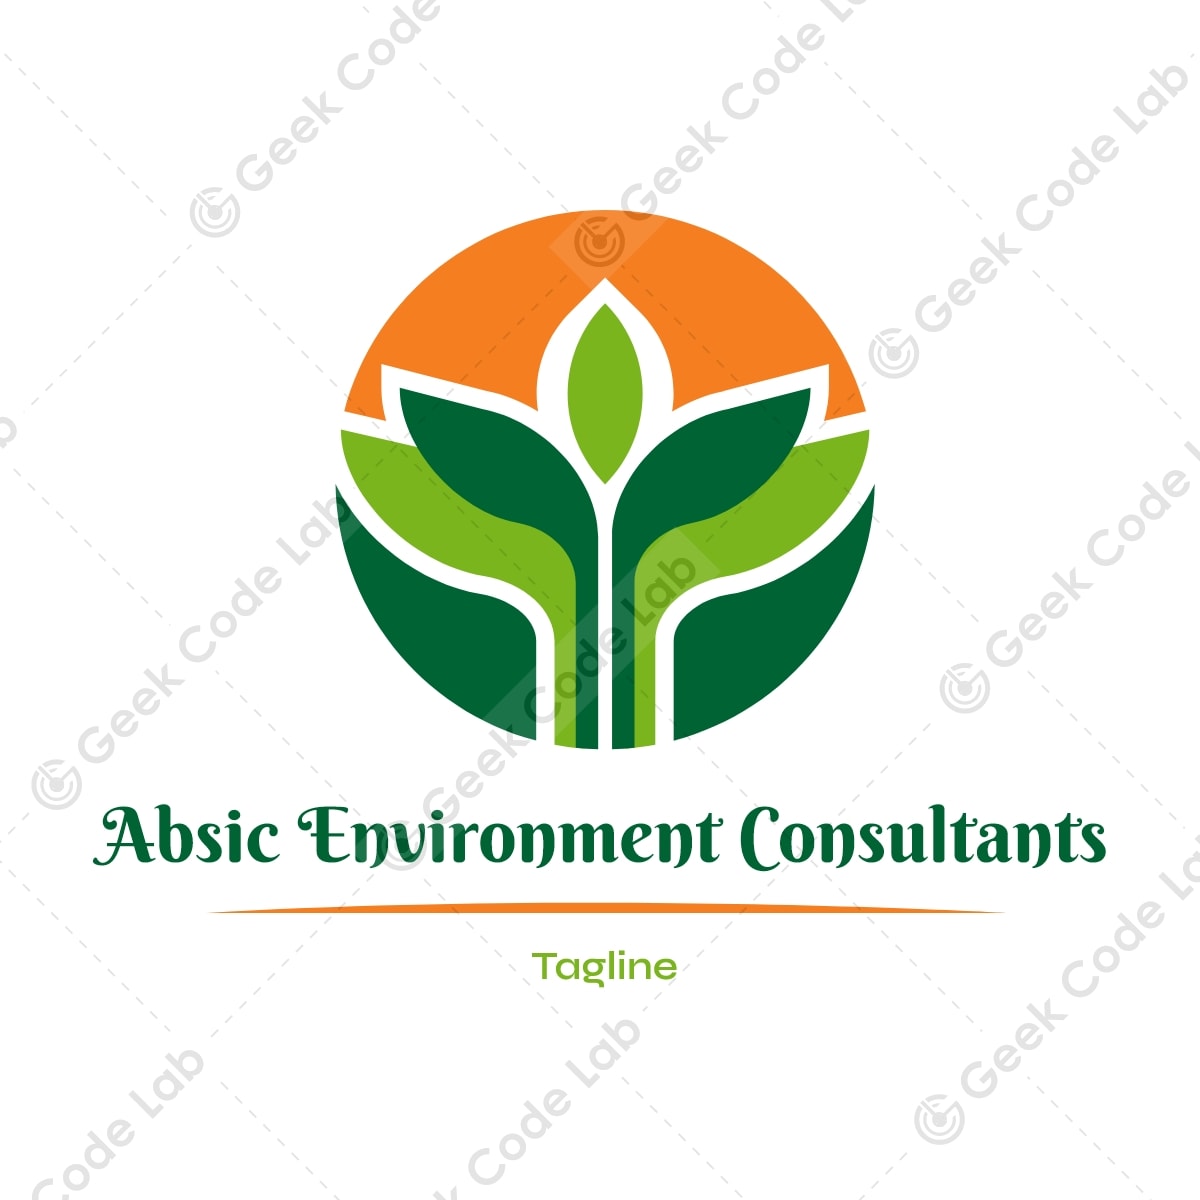 Absic Environment Consultants